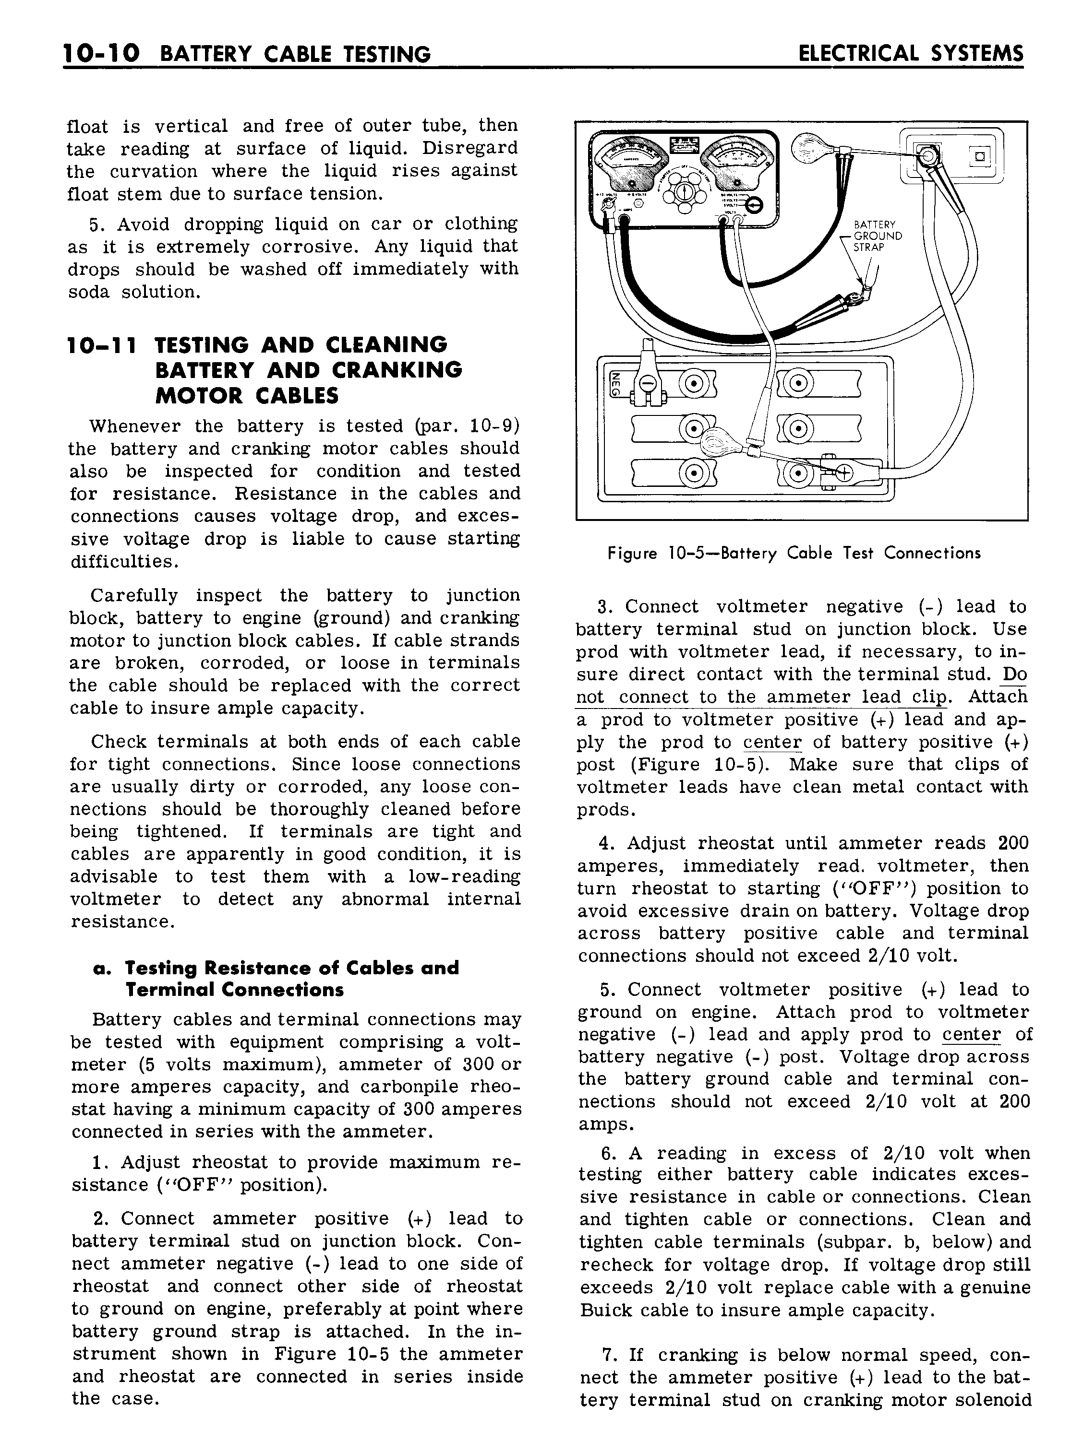 n_10 1961 Buick Shop Manual - Electrical Systems-010-010.jpg